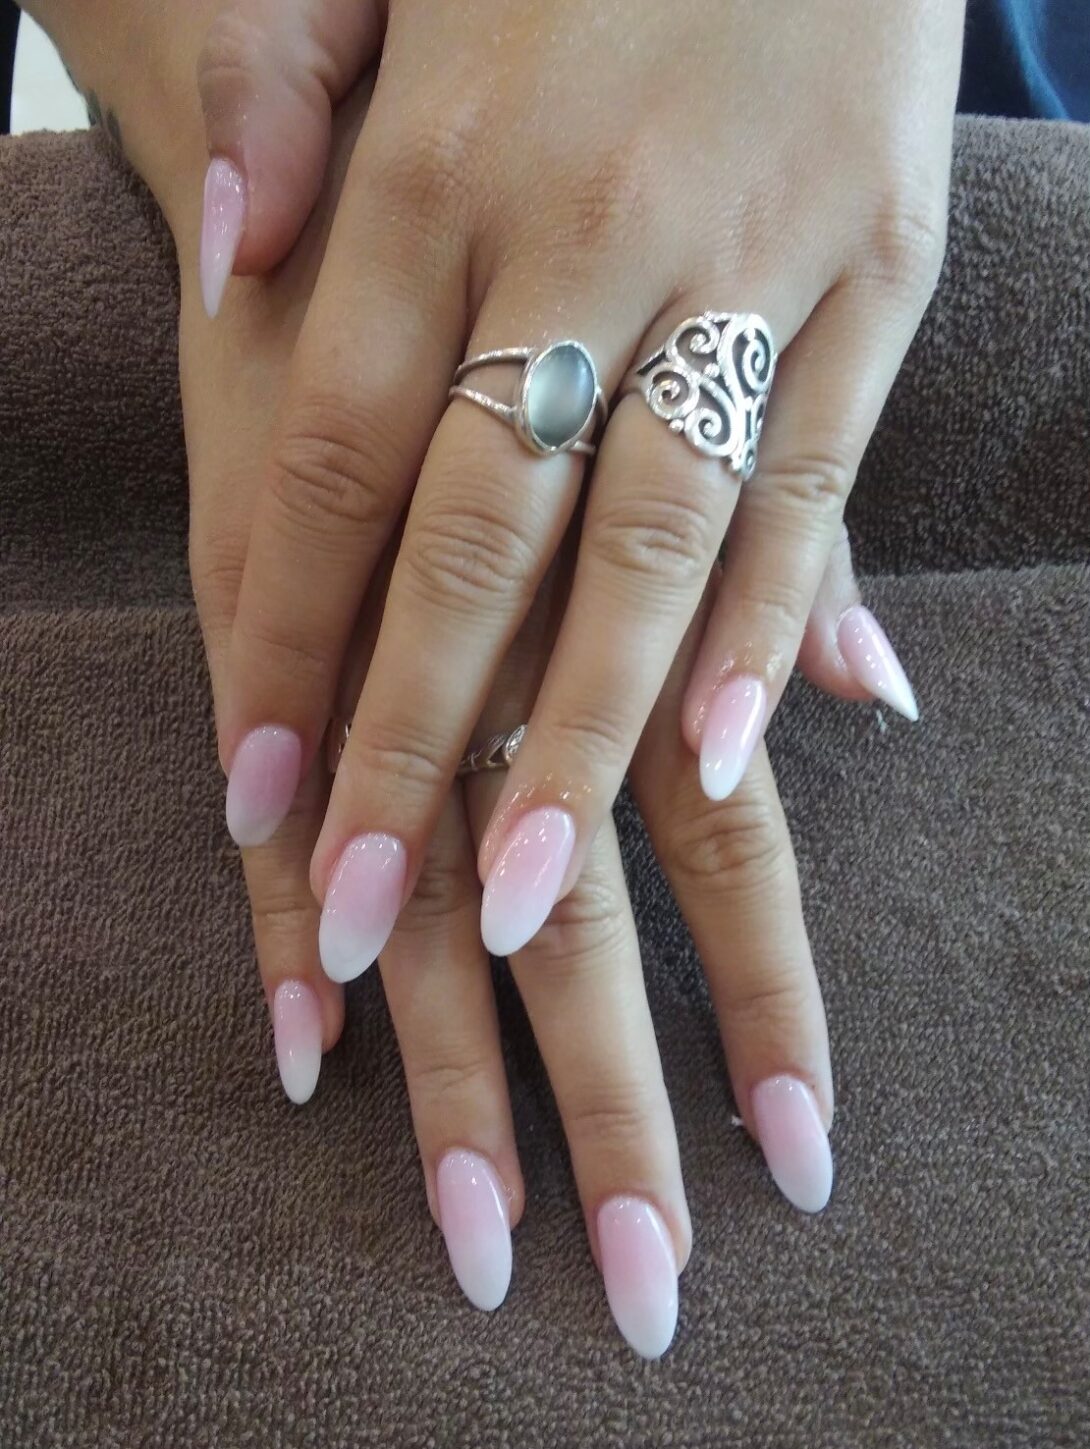 A woman 's hands with two rings on top of them.